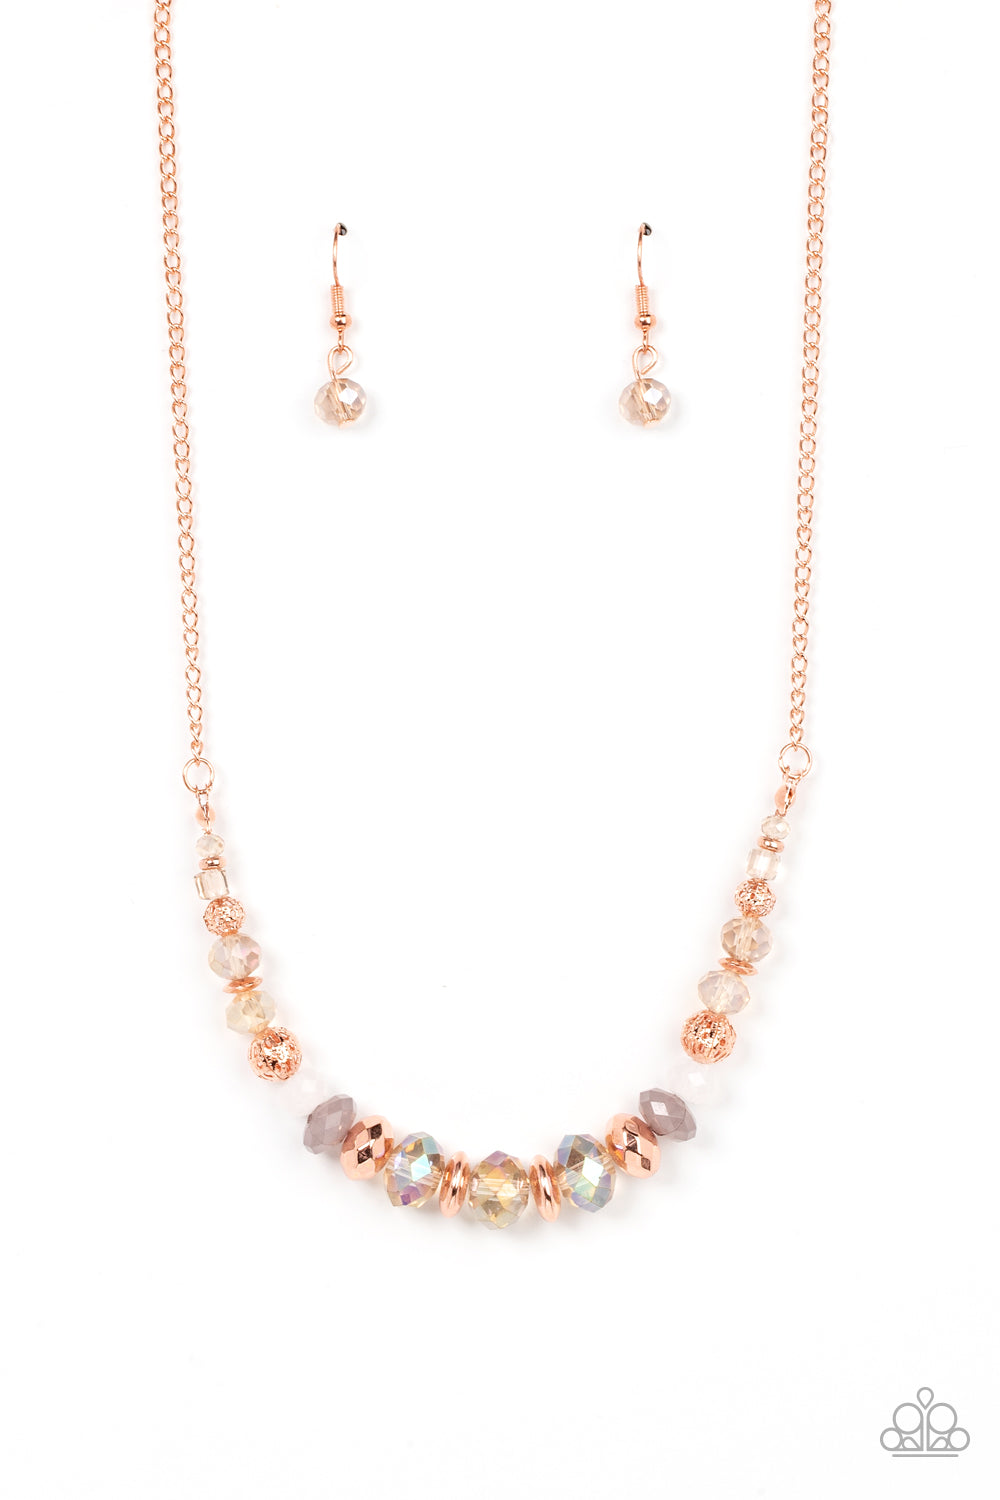 TURN UP THE TEA LIGHTS - BLUSH COPPER - Paparazzi - Varying in opacity, an enchanting collection of iridescent pink, white and champagne colored crystal-like beads are threaded along an invisible wire that is attached to a shiny blush copper chain below the collar. Mismatched blush copper beads and ornate blush copper accents are sprinkled between the glittery compilation, adding whimsy and sheen to the colorful statement piece.